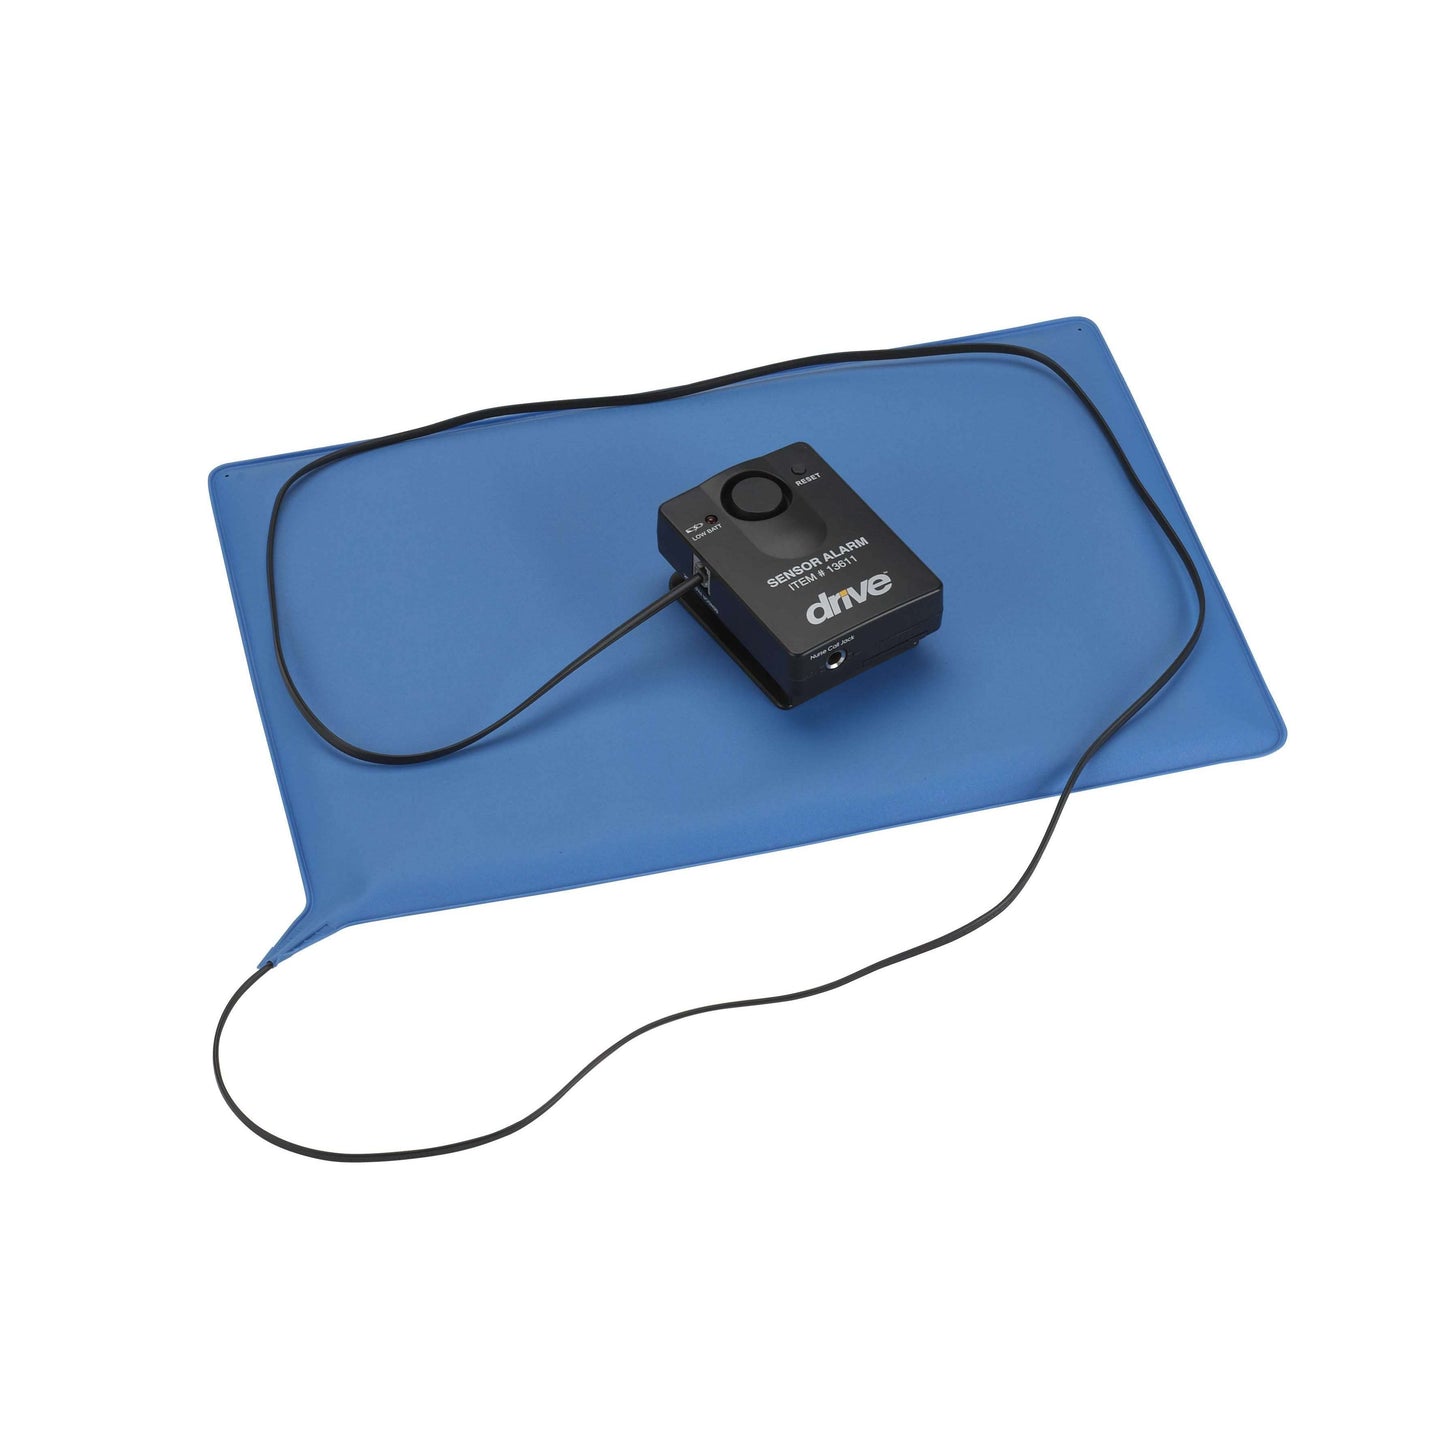 Drive 13608 Pressure Sensitive Bed Chair Patient Alarm with Reset Button, 10" x 15" Chair Pad